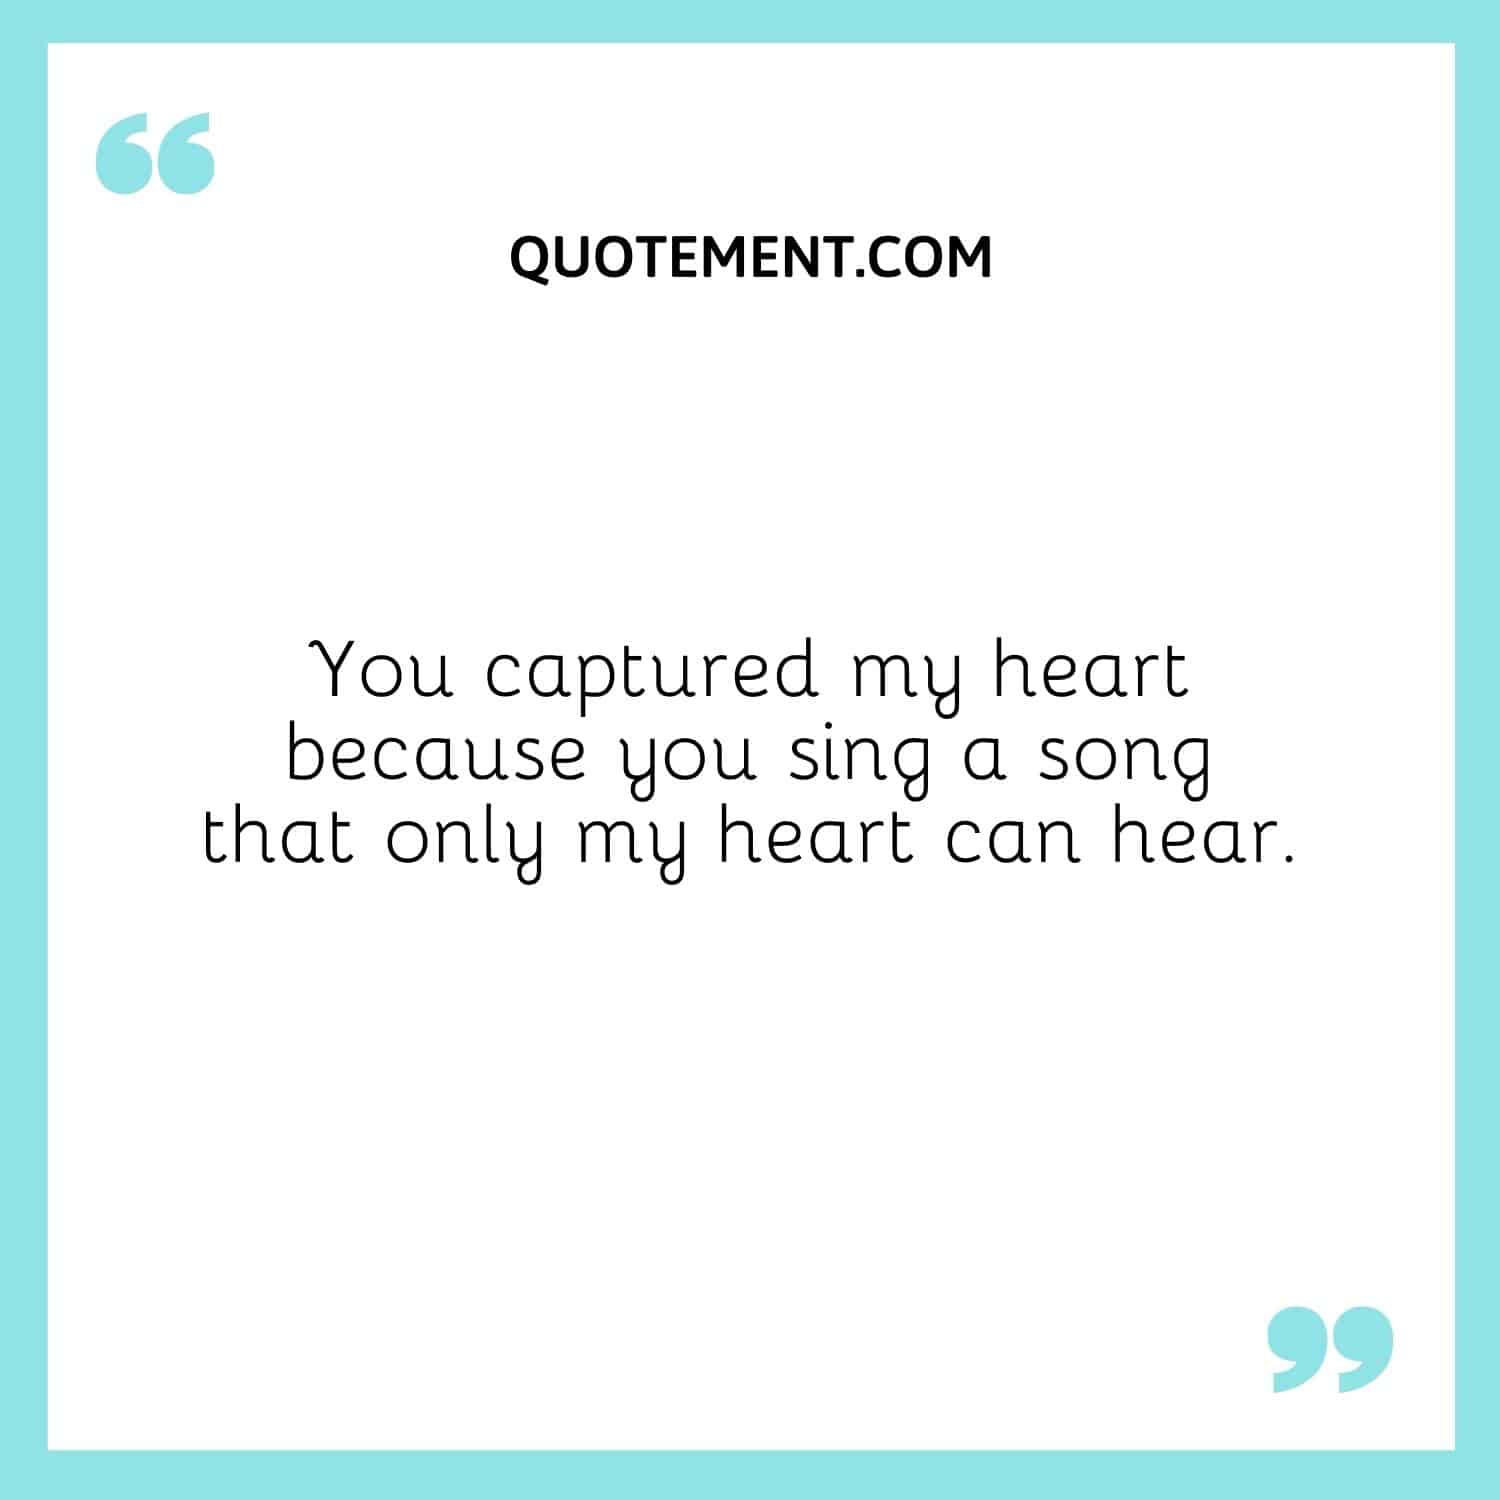 You captured my heart because you sing a song that only my heart can hear